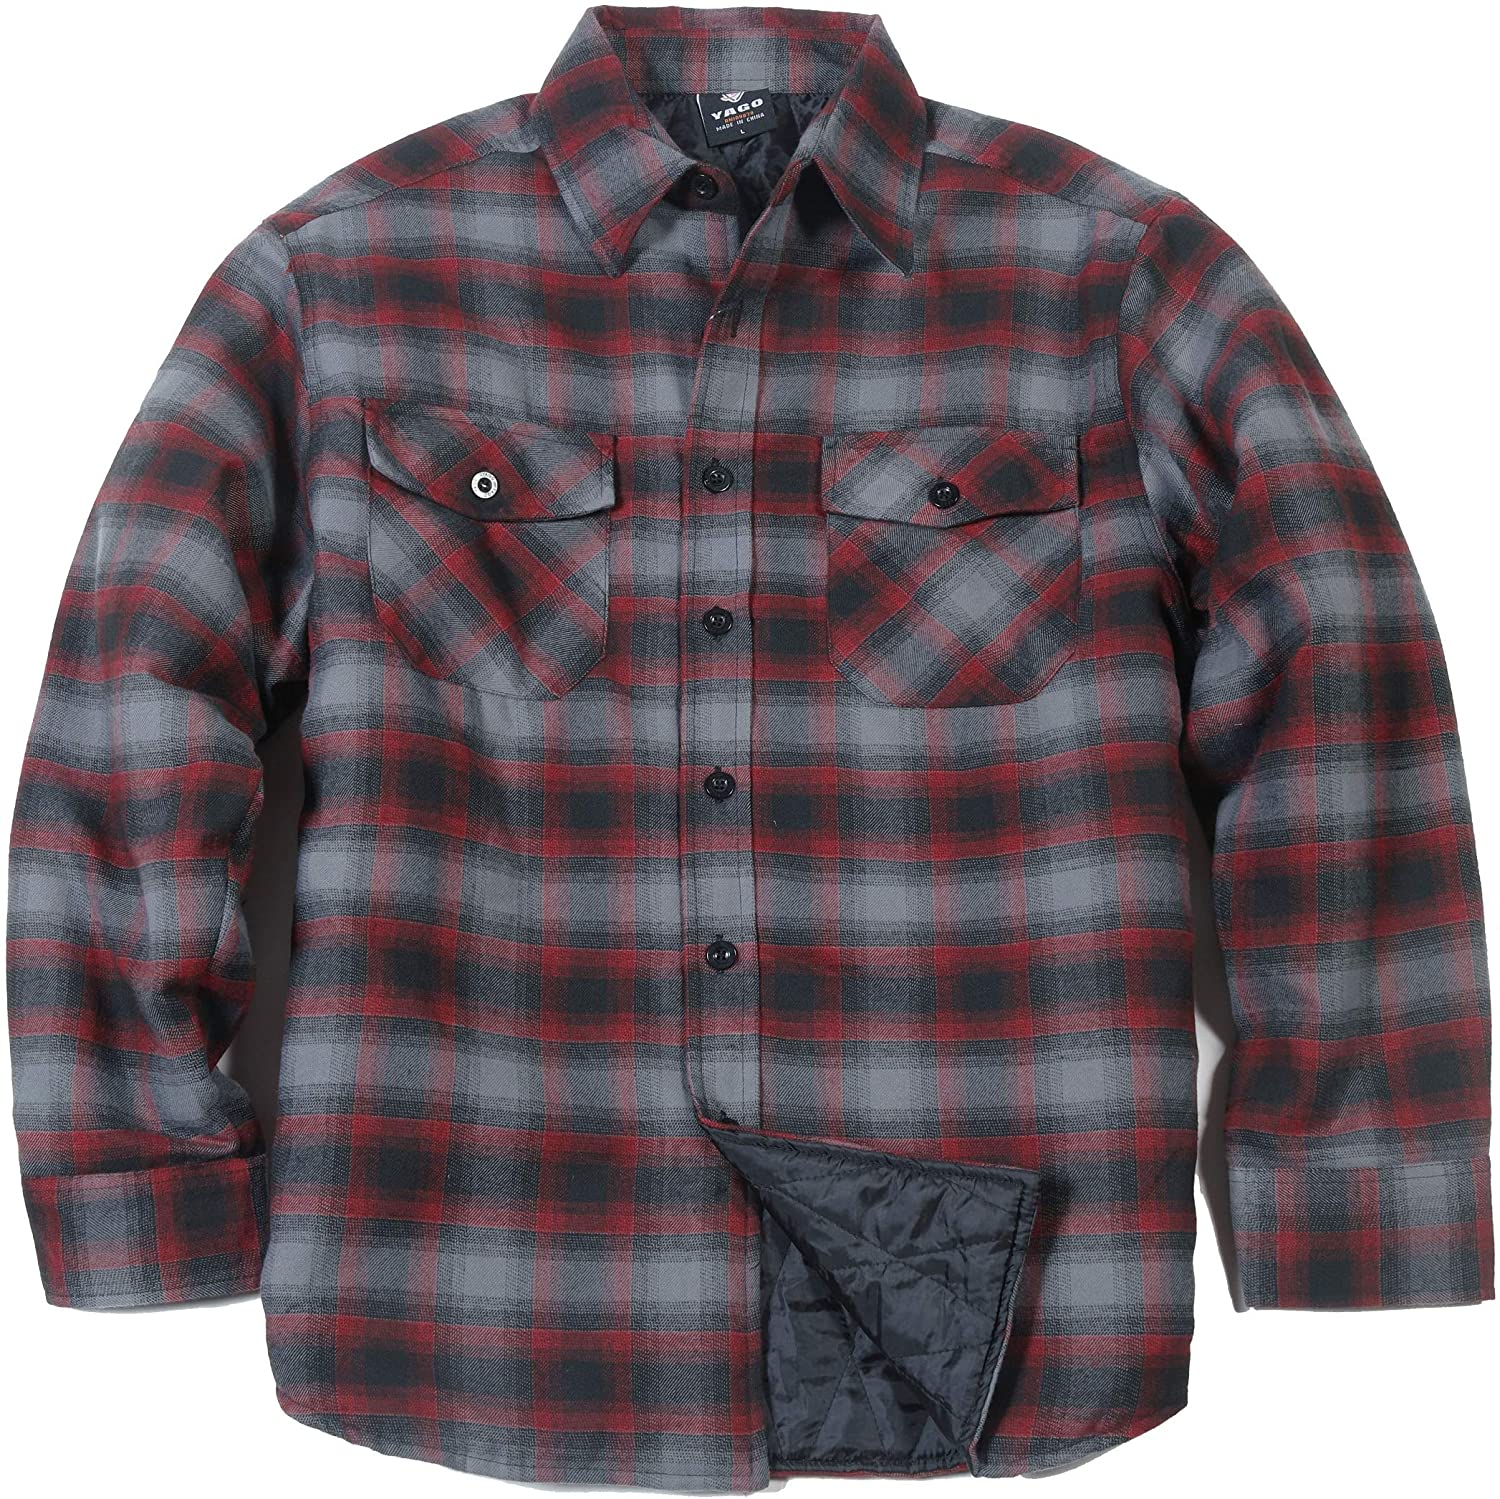 YAGO Men's Quilted Lining Button Up Plaid Flannel Shirt Jacket with ...